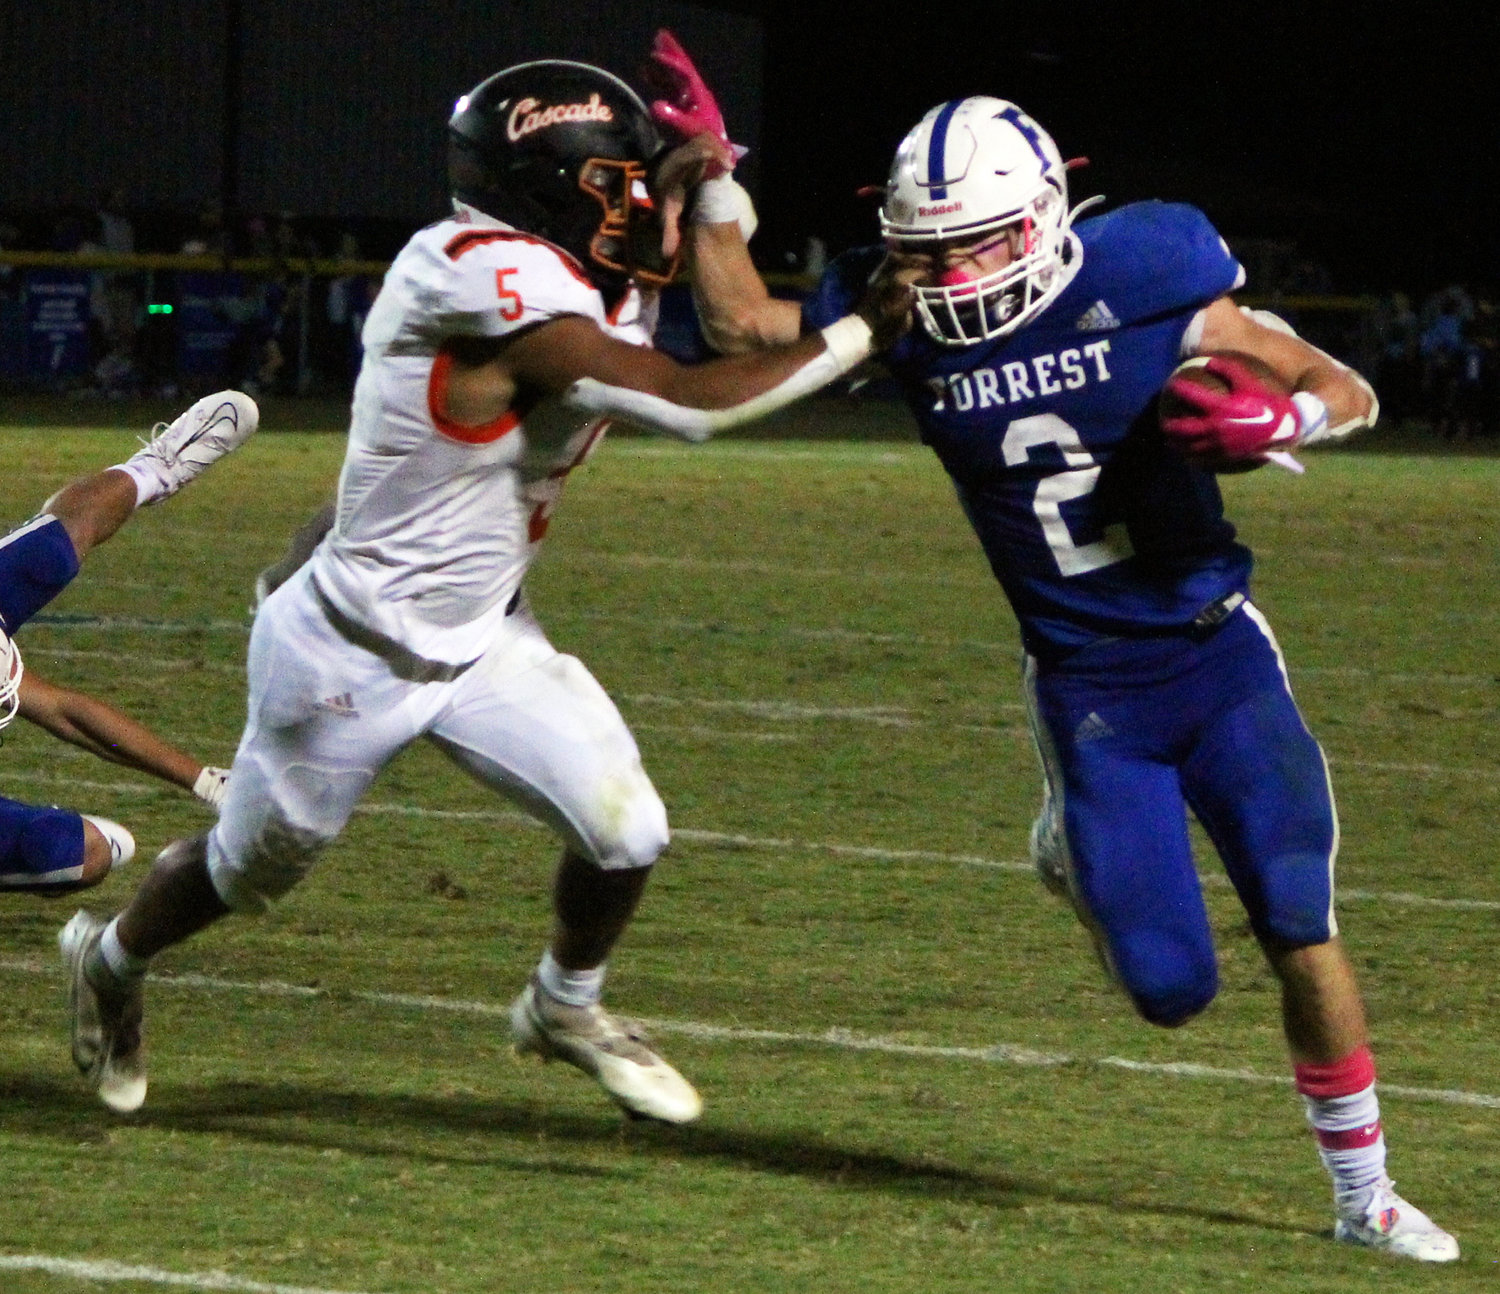 Tayton Swift gives a stiff arm and picks up a handful of yards for Forrest.